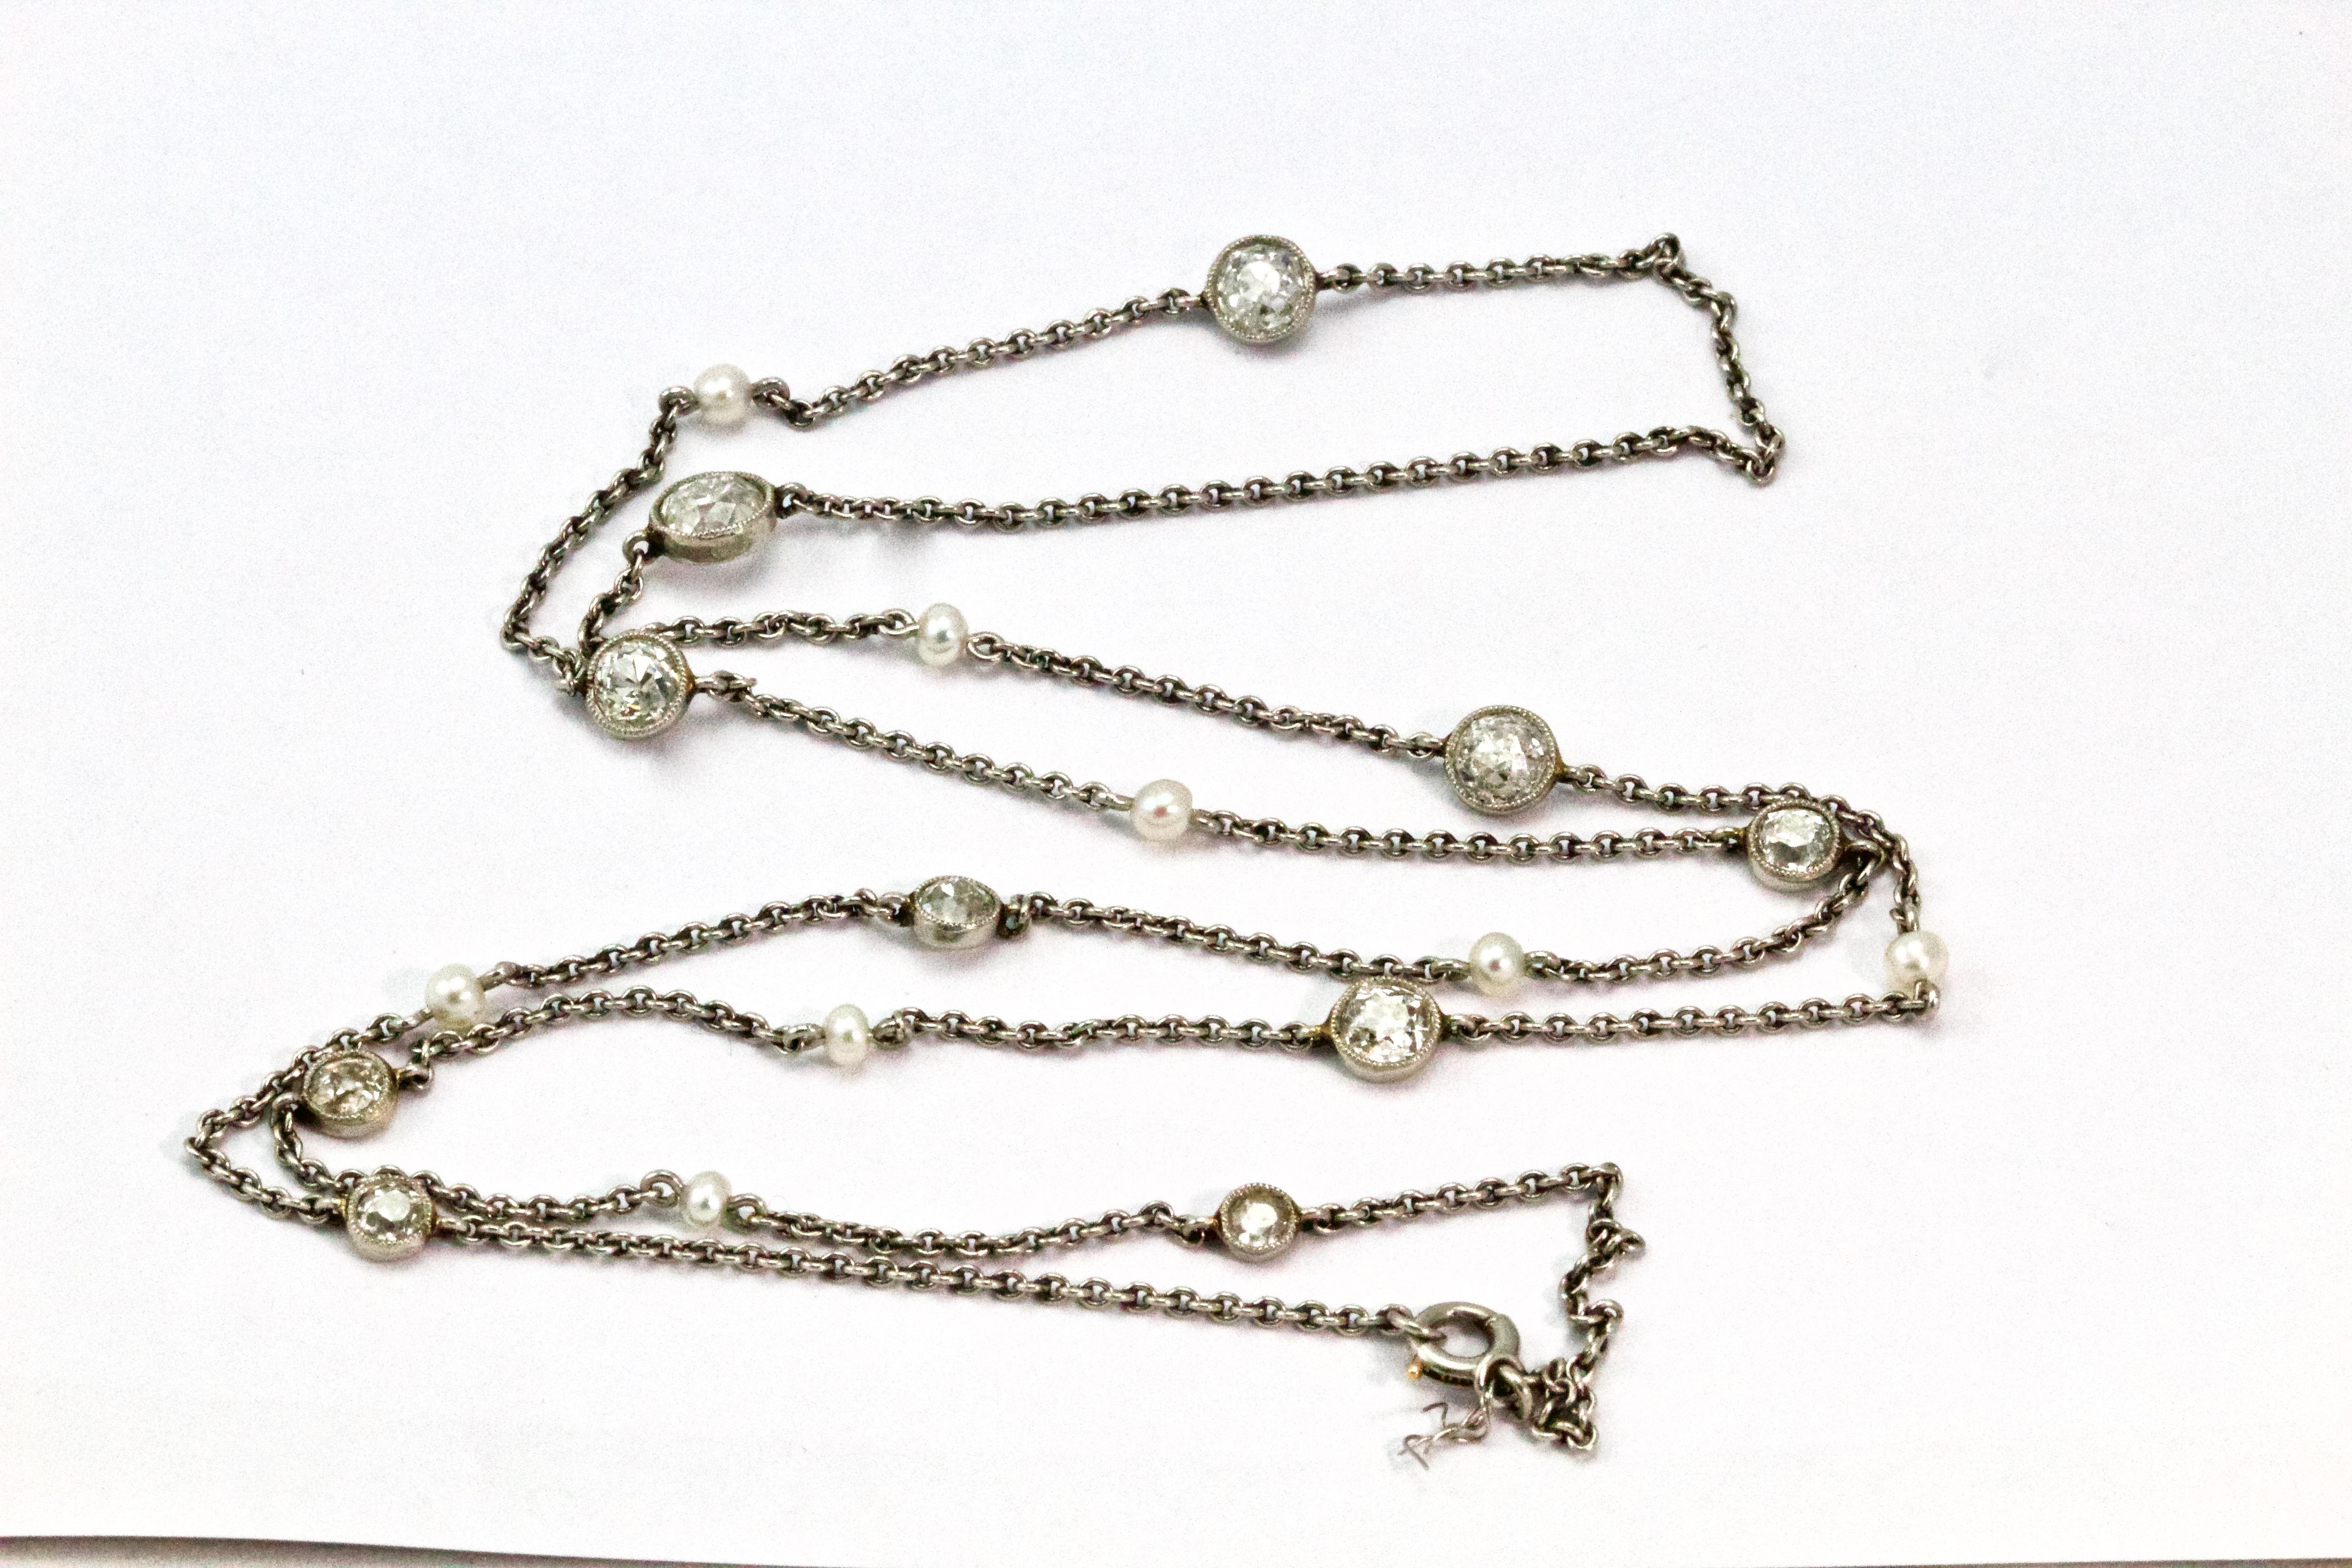 Fashioned circa 1920s this Art Deco long chain is comprised of platinum cable style links to give a chain of approximately 22 inches long. Beautifully embellished with 10 graduating Old European cut diamonds alternated with 8 natural pearls. 
Weight